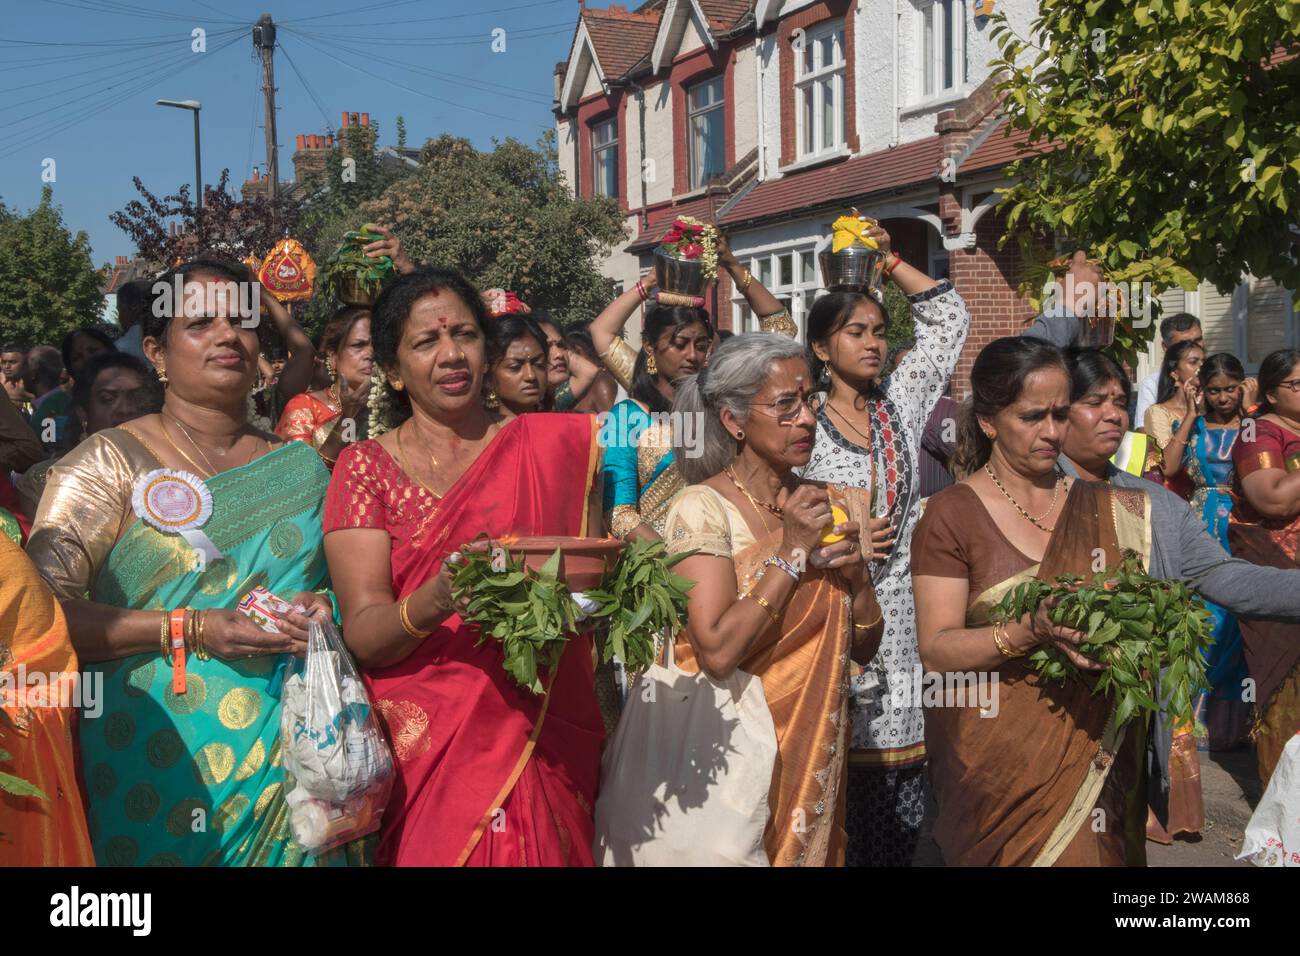 Immigration into Britain, British multicultural society, group women Hindu community attend and take part in a traditional Hindu annual festival in suburban London England 2022 2000s HOMER SYKES Stock Photo